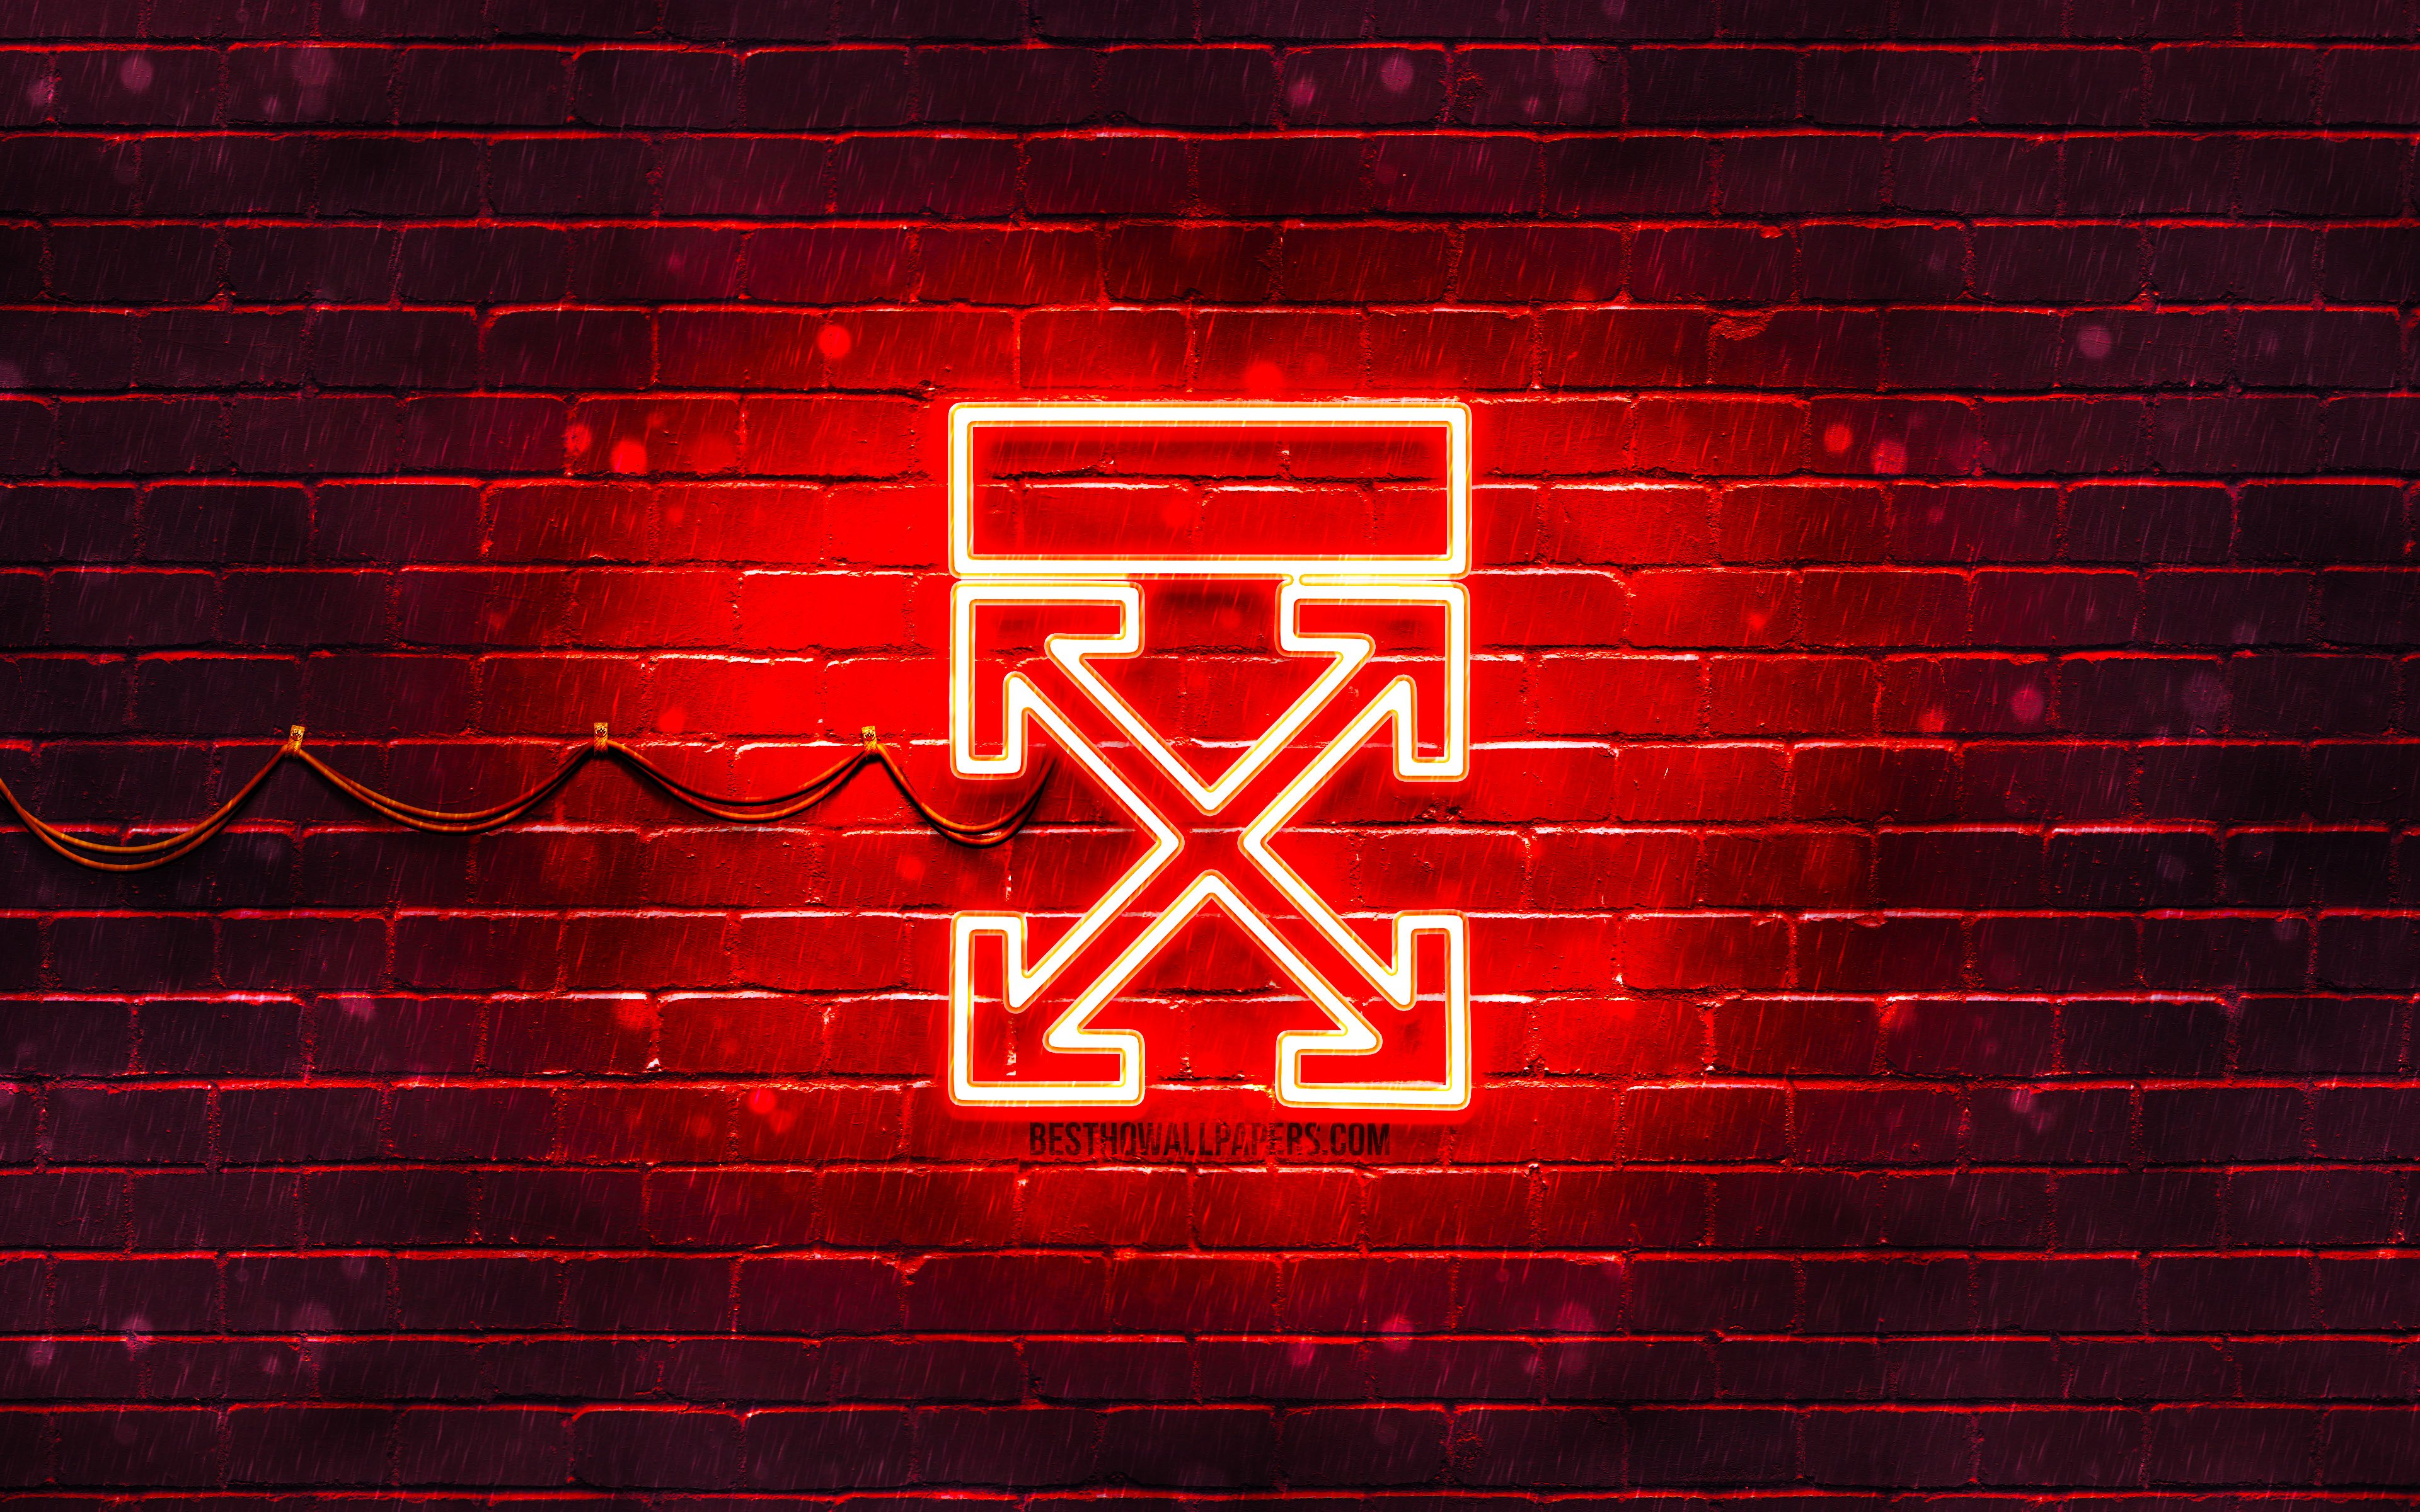 Download wallpapers Off-white red logo, 4k, red brickwall, Off-white ...